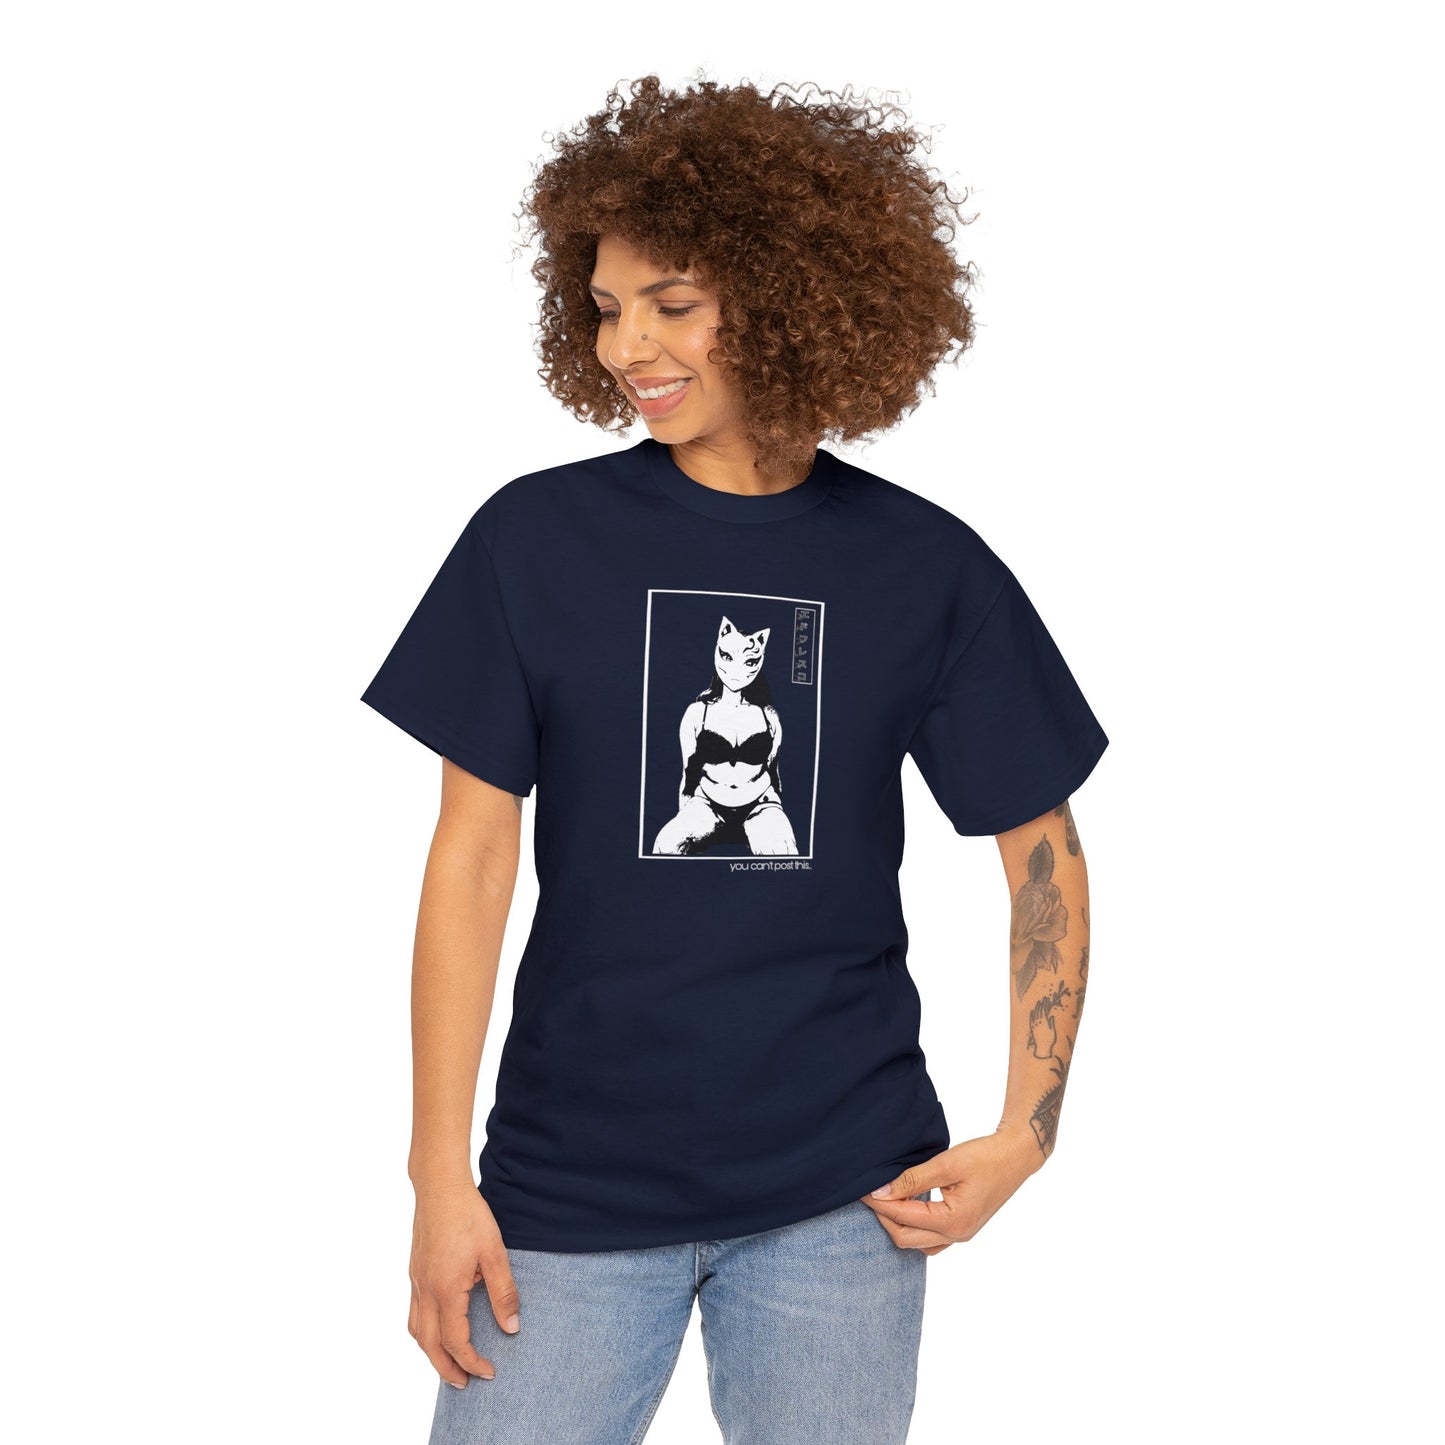 Anime Style Art Unisex Heavy Cotton Tee- "You Can't Post This"